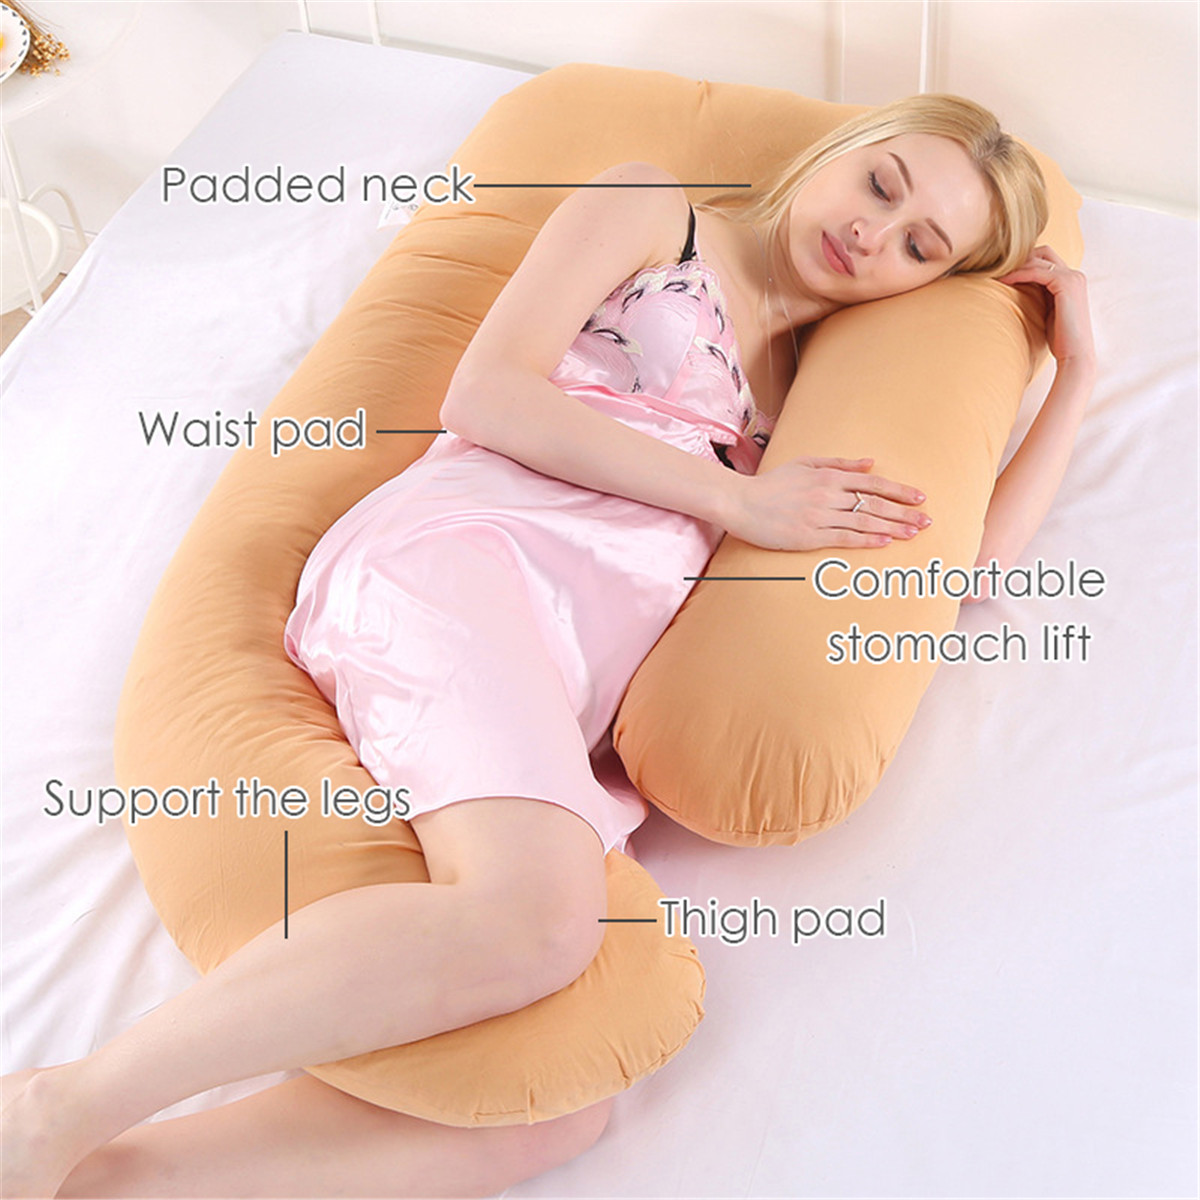 Multi-functional-Mother-Pillow-Side-Sleeper-Pure-Cotton-Removable-Washable-U-shaped-Napping-Pillowca-1809583-3